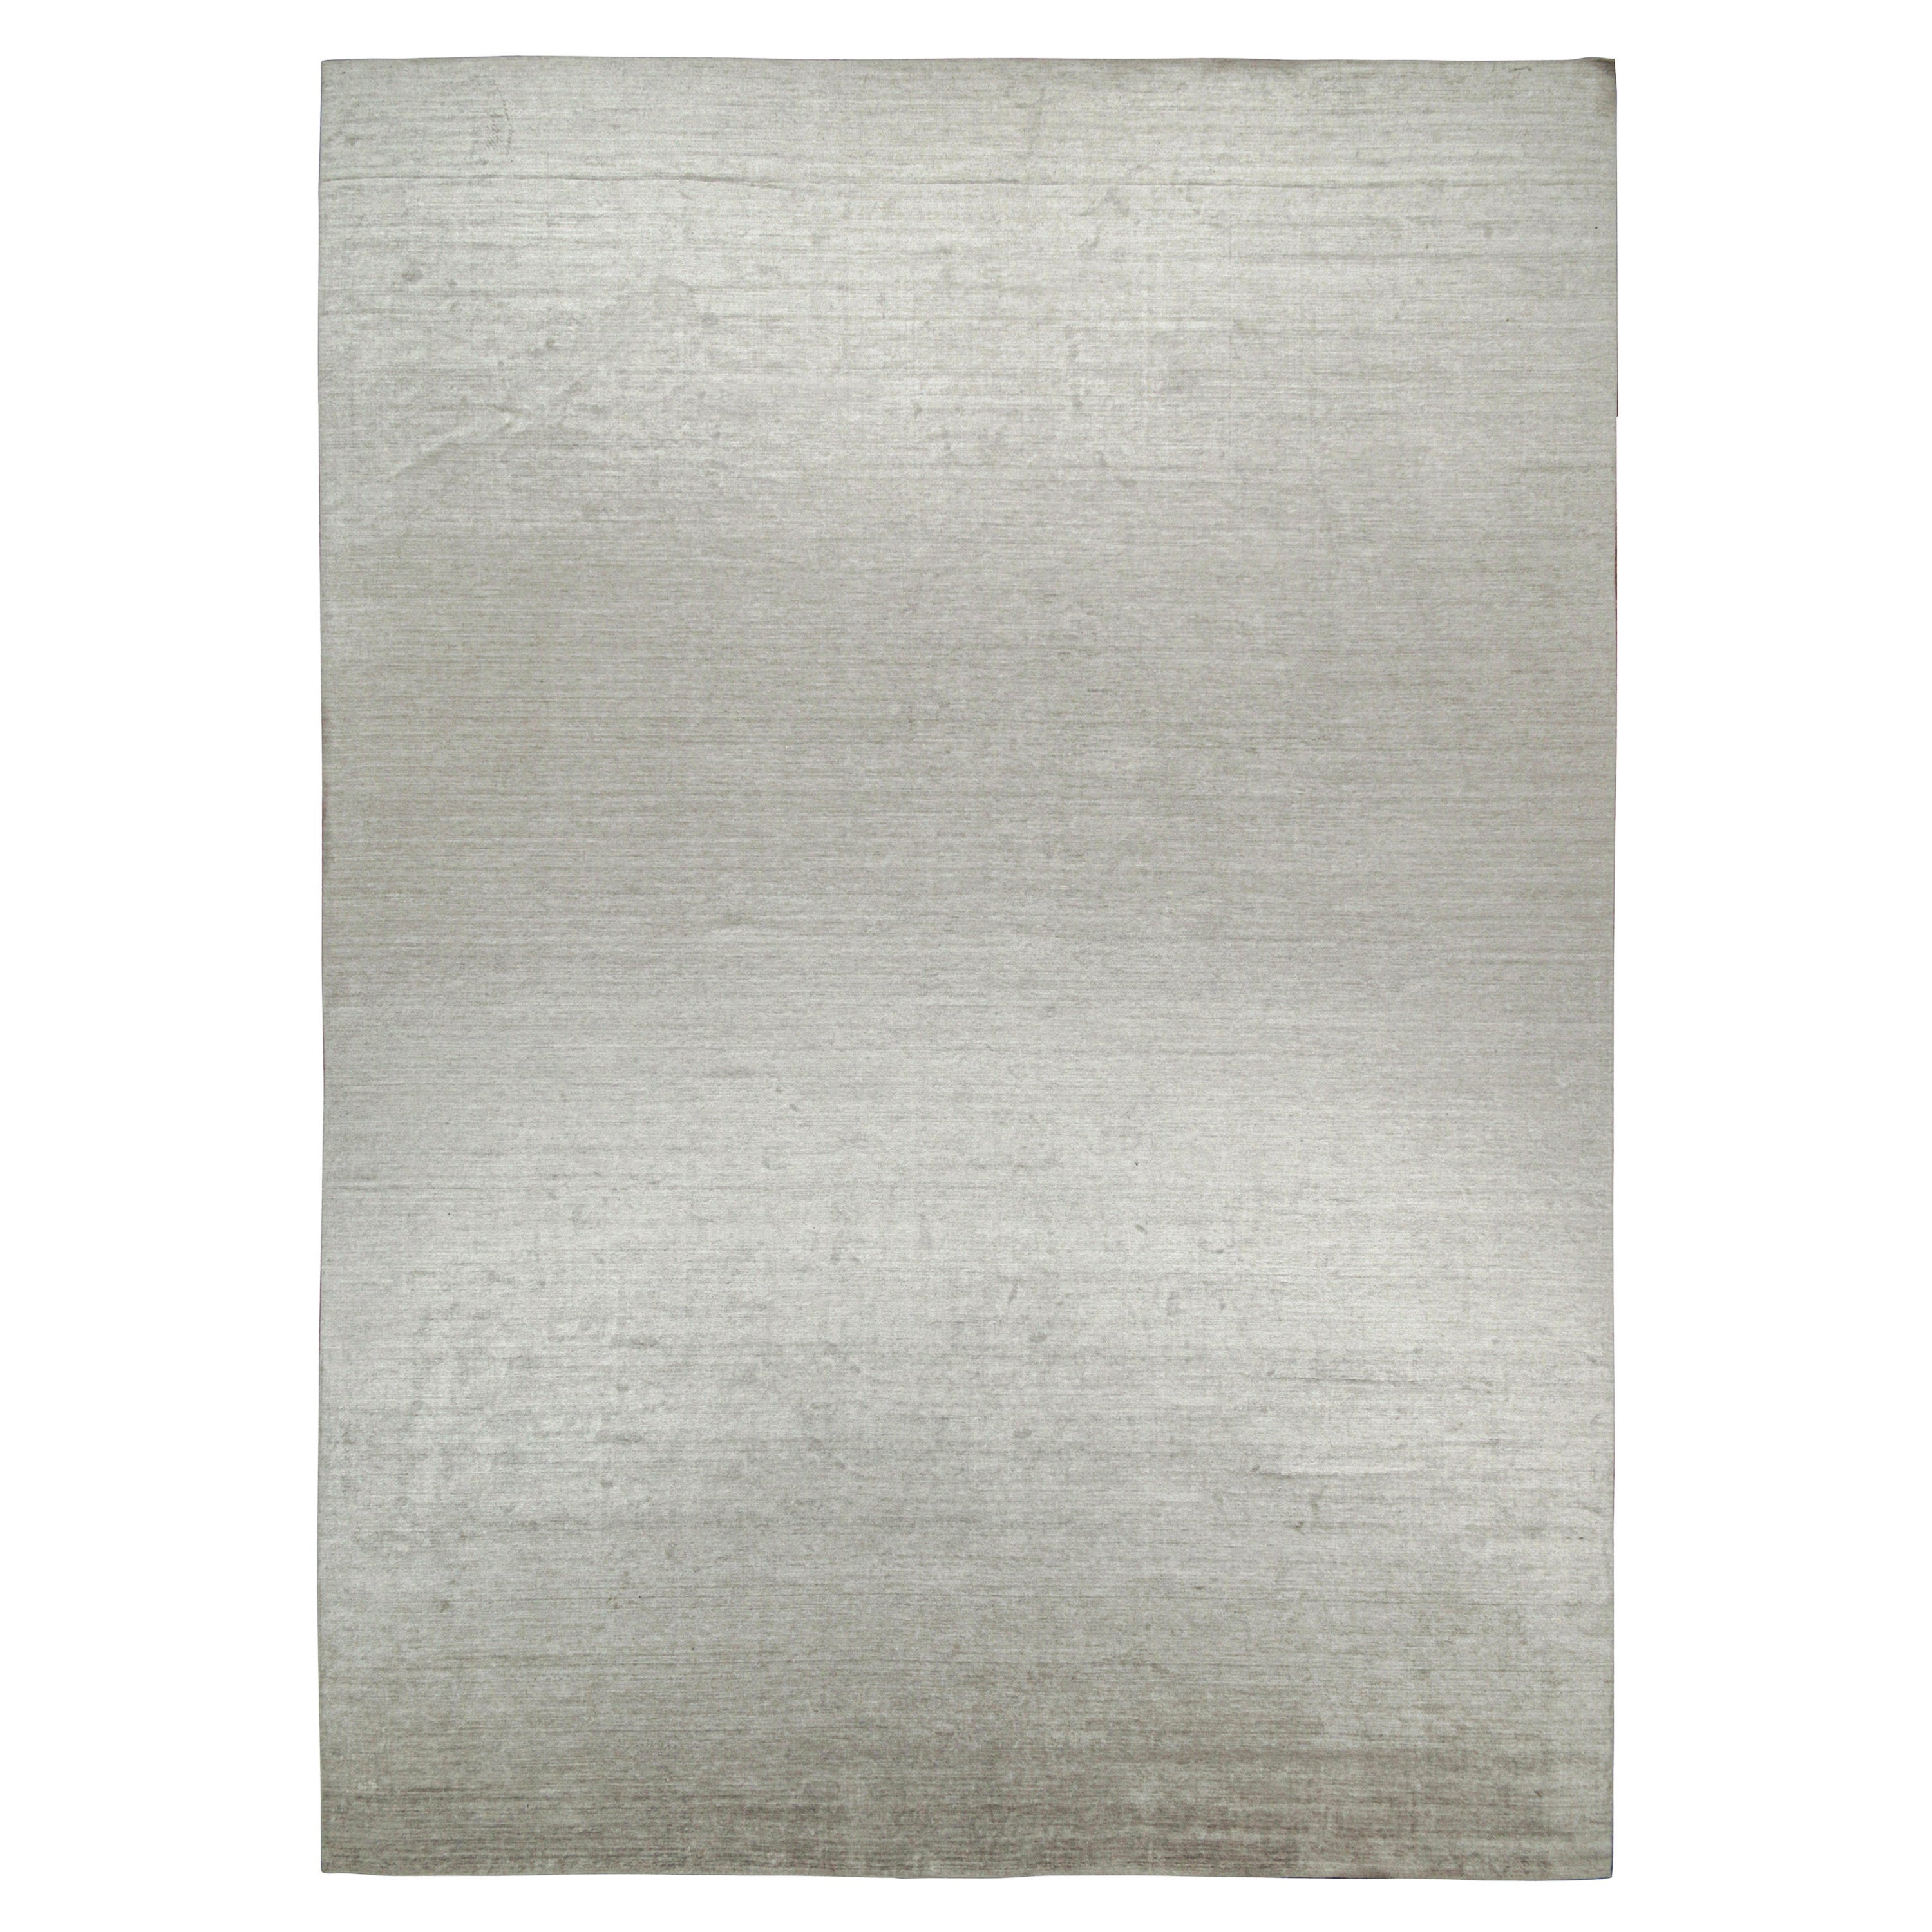 Rug & Kilim’s Modern Rug in Solid Gray and Off-White Striae